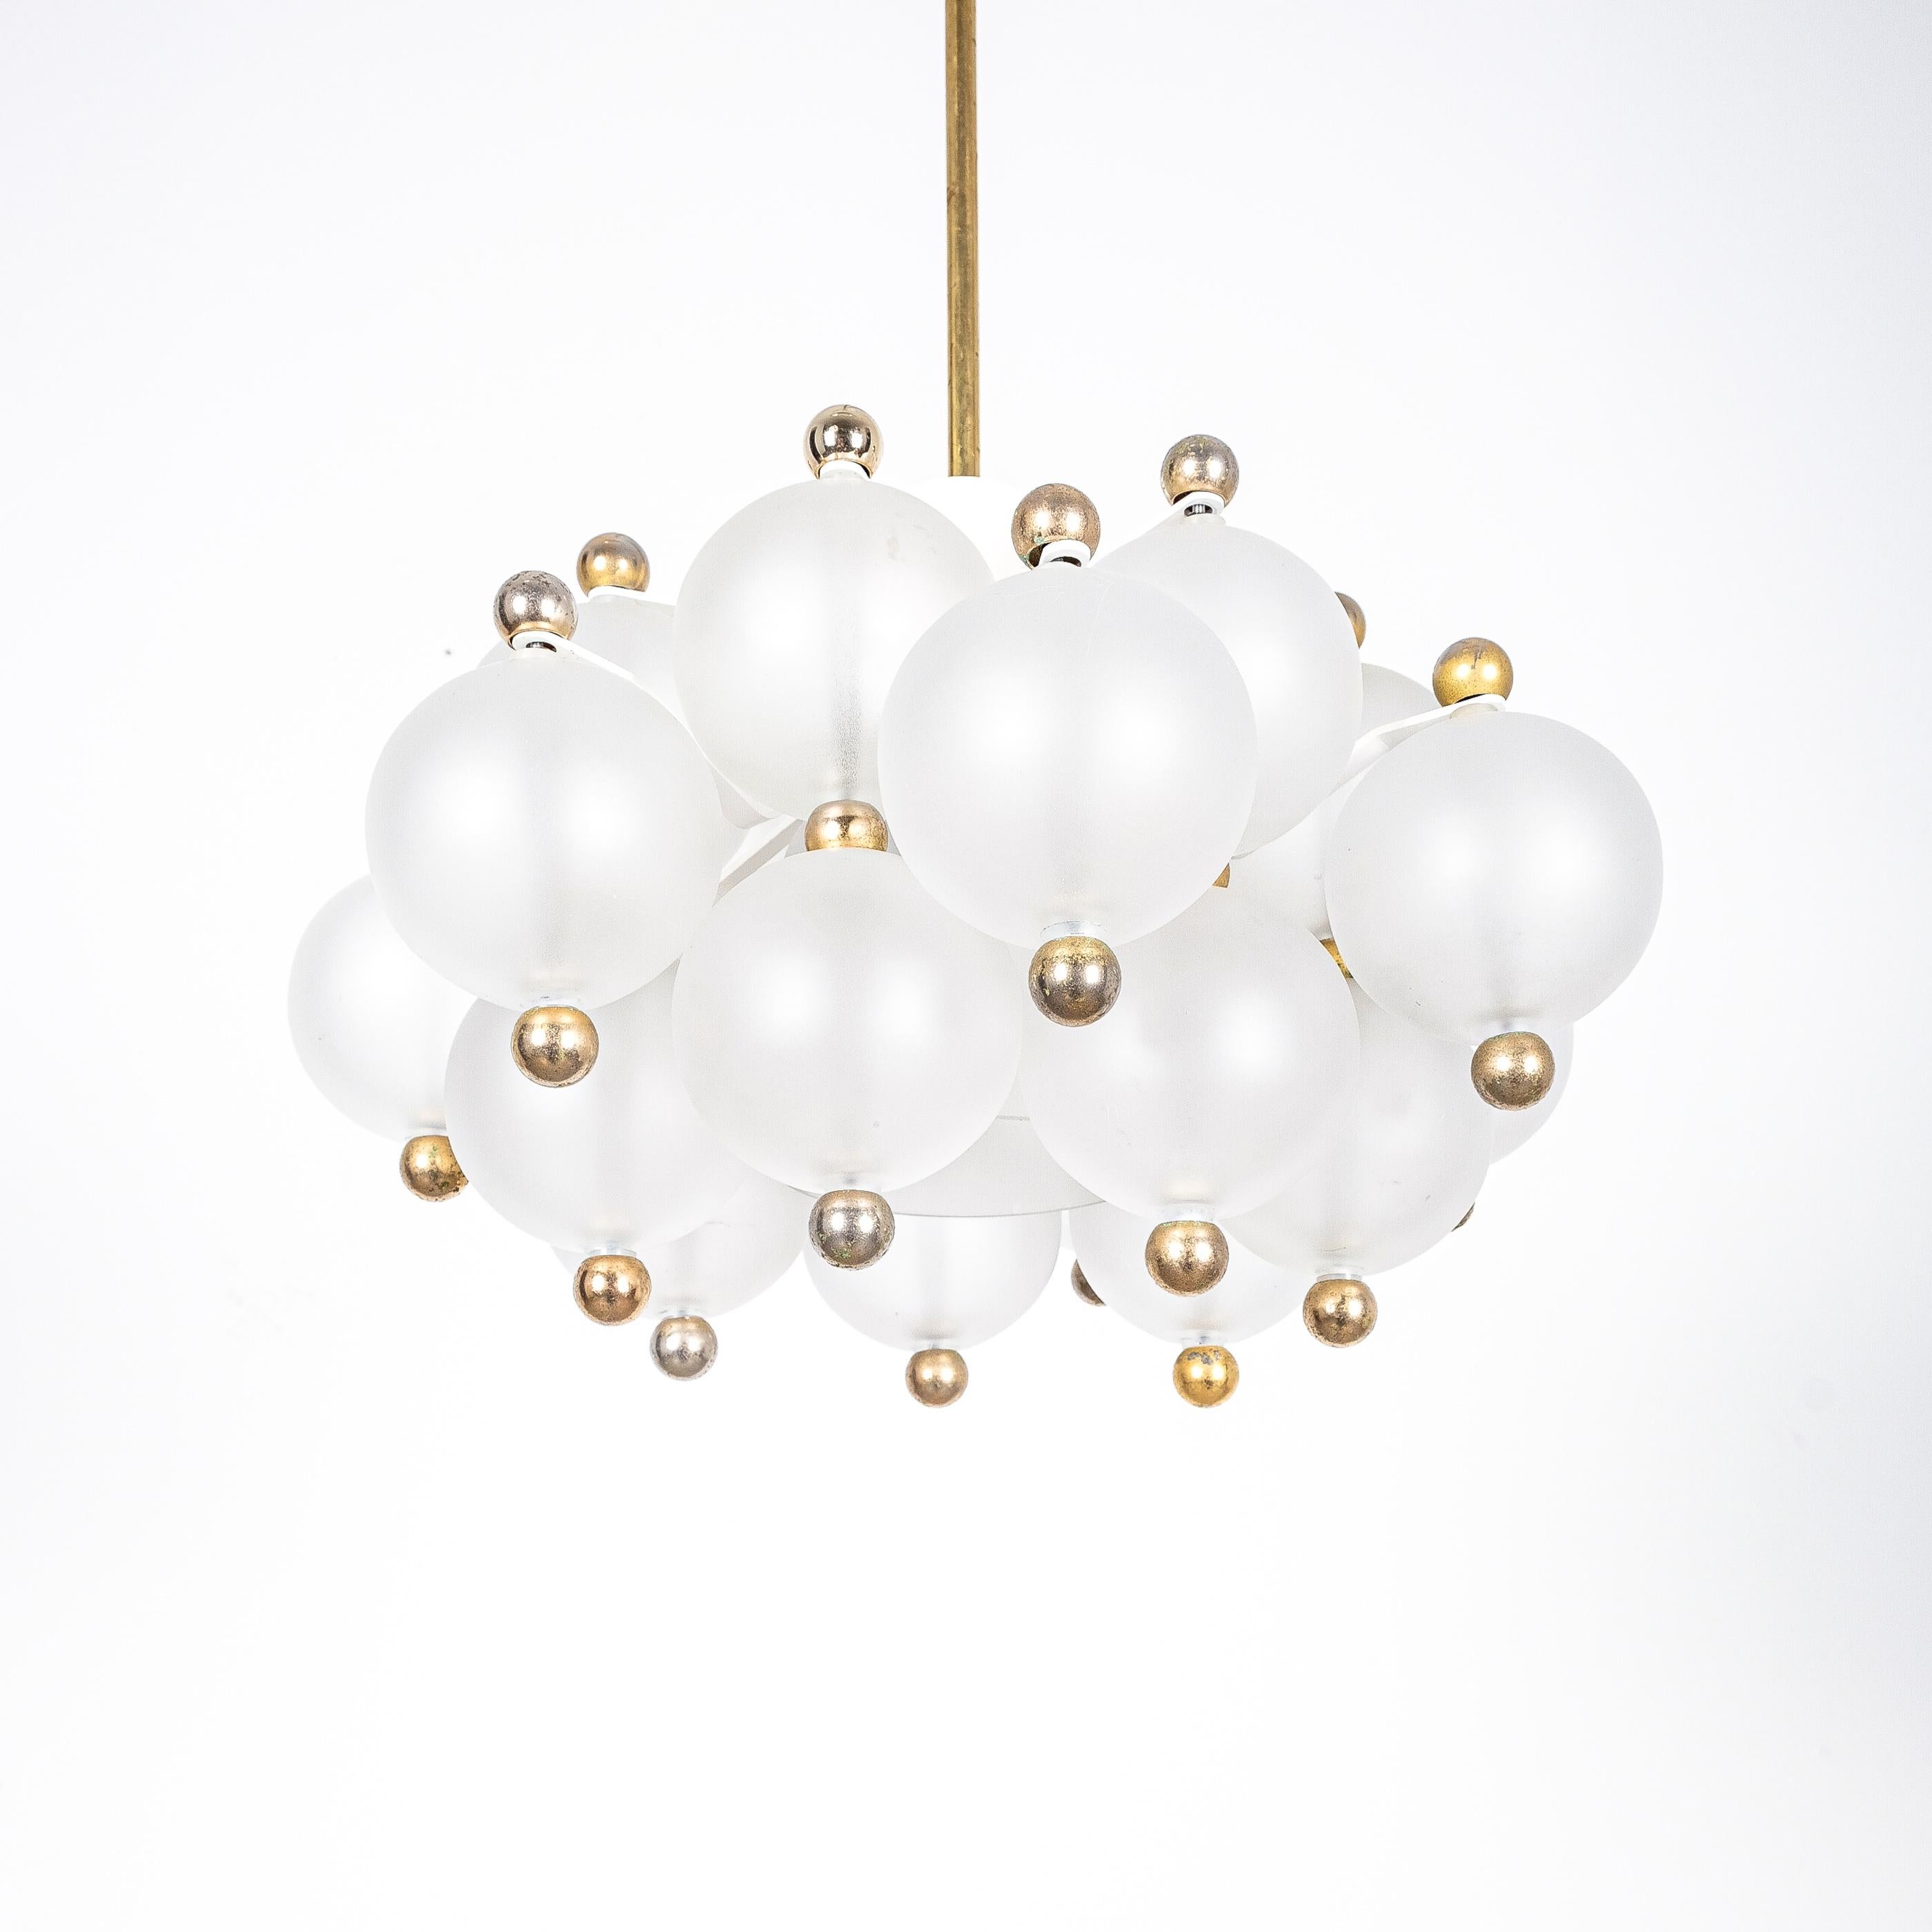 German Satin Glass Chandeliers '2' by Kinkeldey with Gold Knobs, circa 1970 For Sale